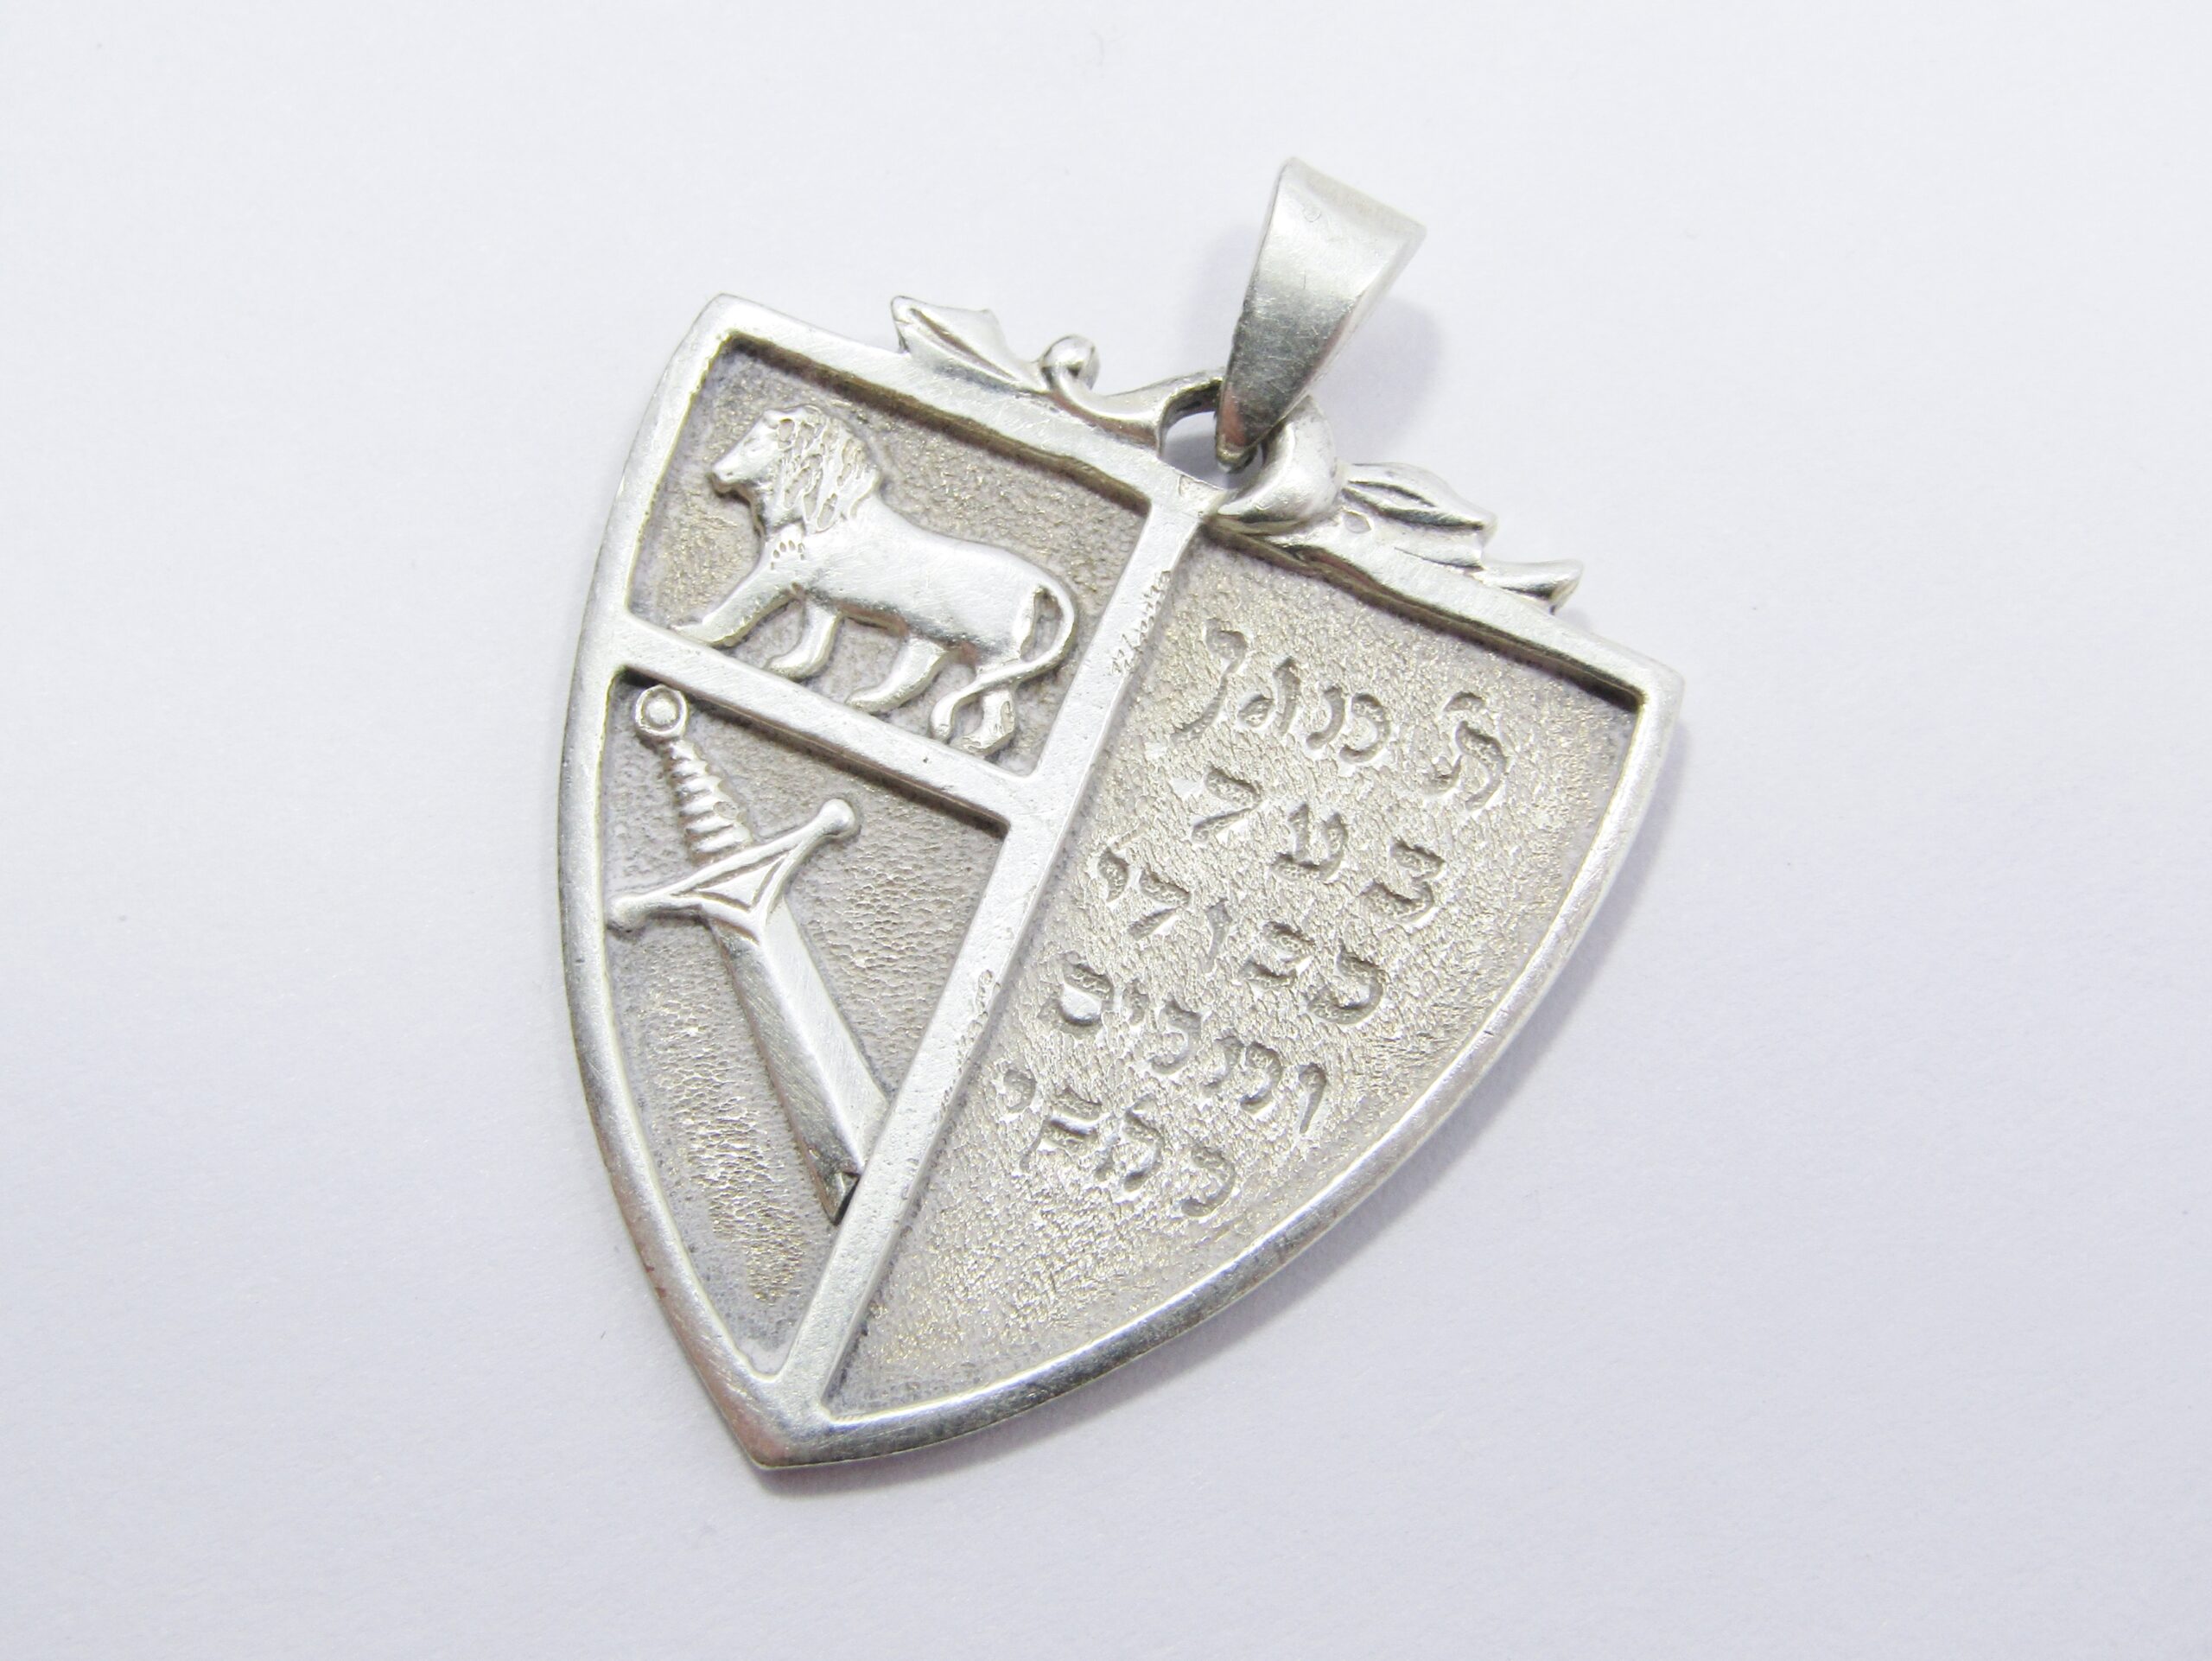 A Lovely Large Shield Pendant in Sterling Silver.